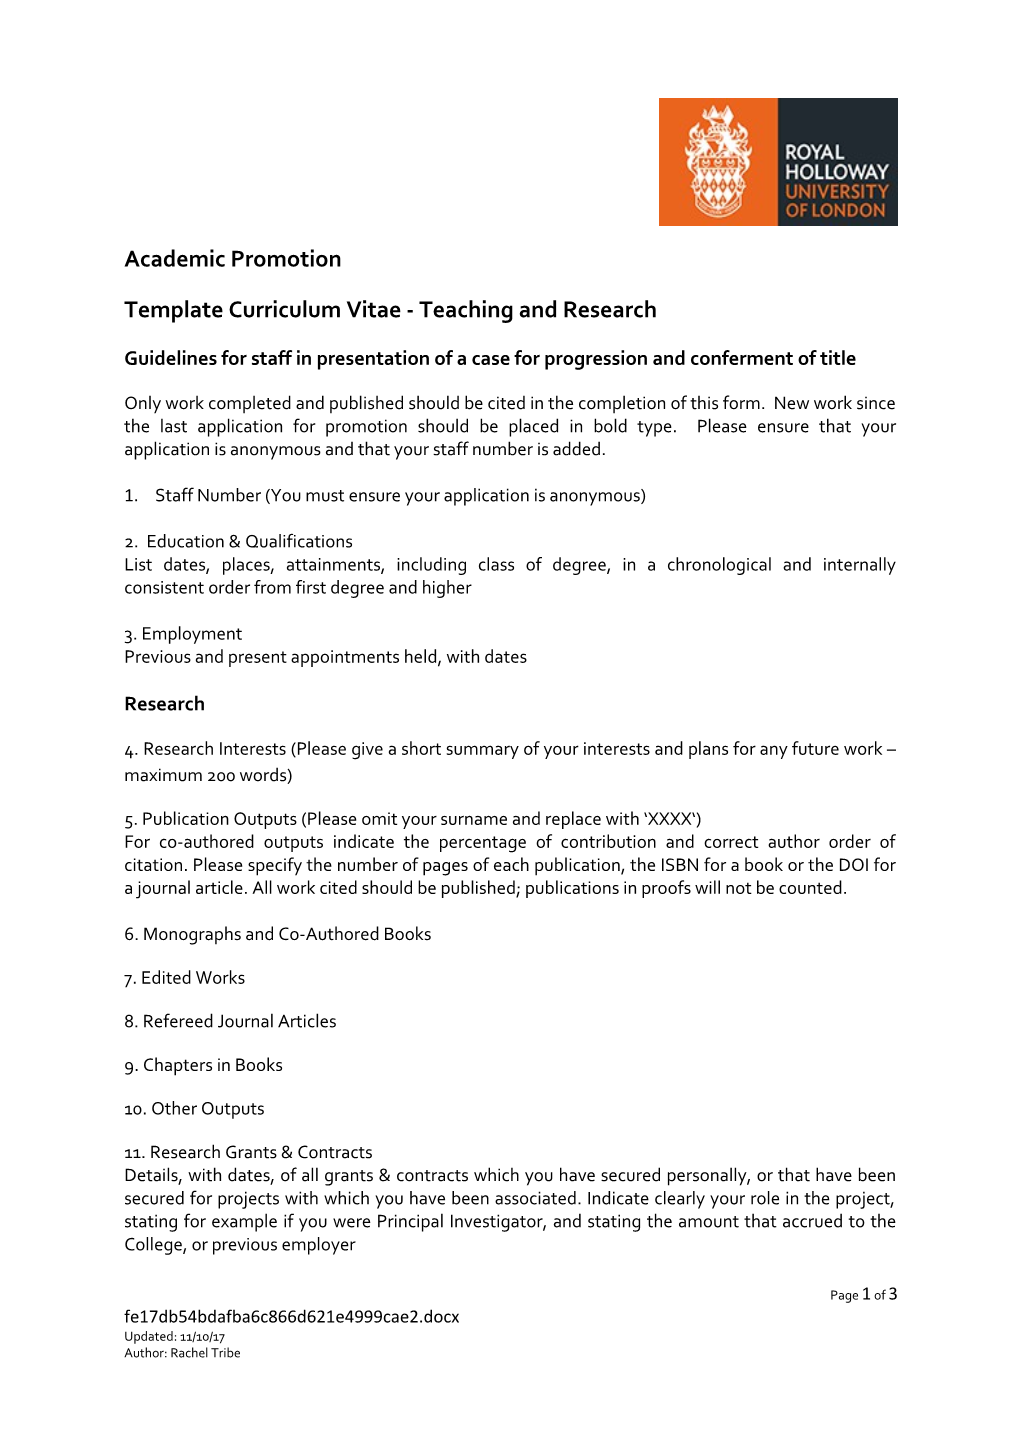 Template Curriculum Vitae - Teaching and Research